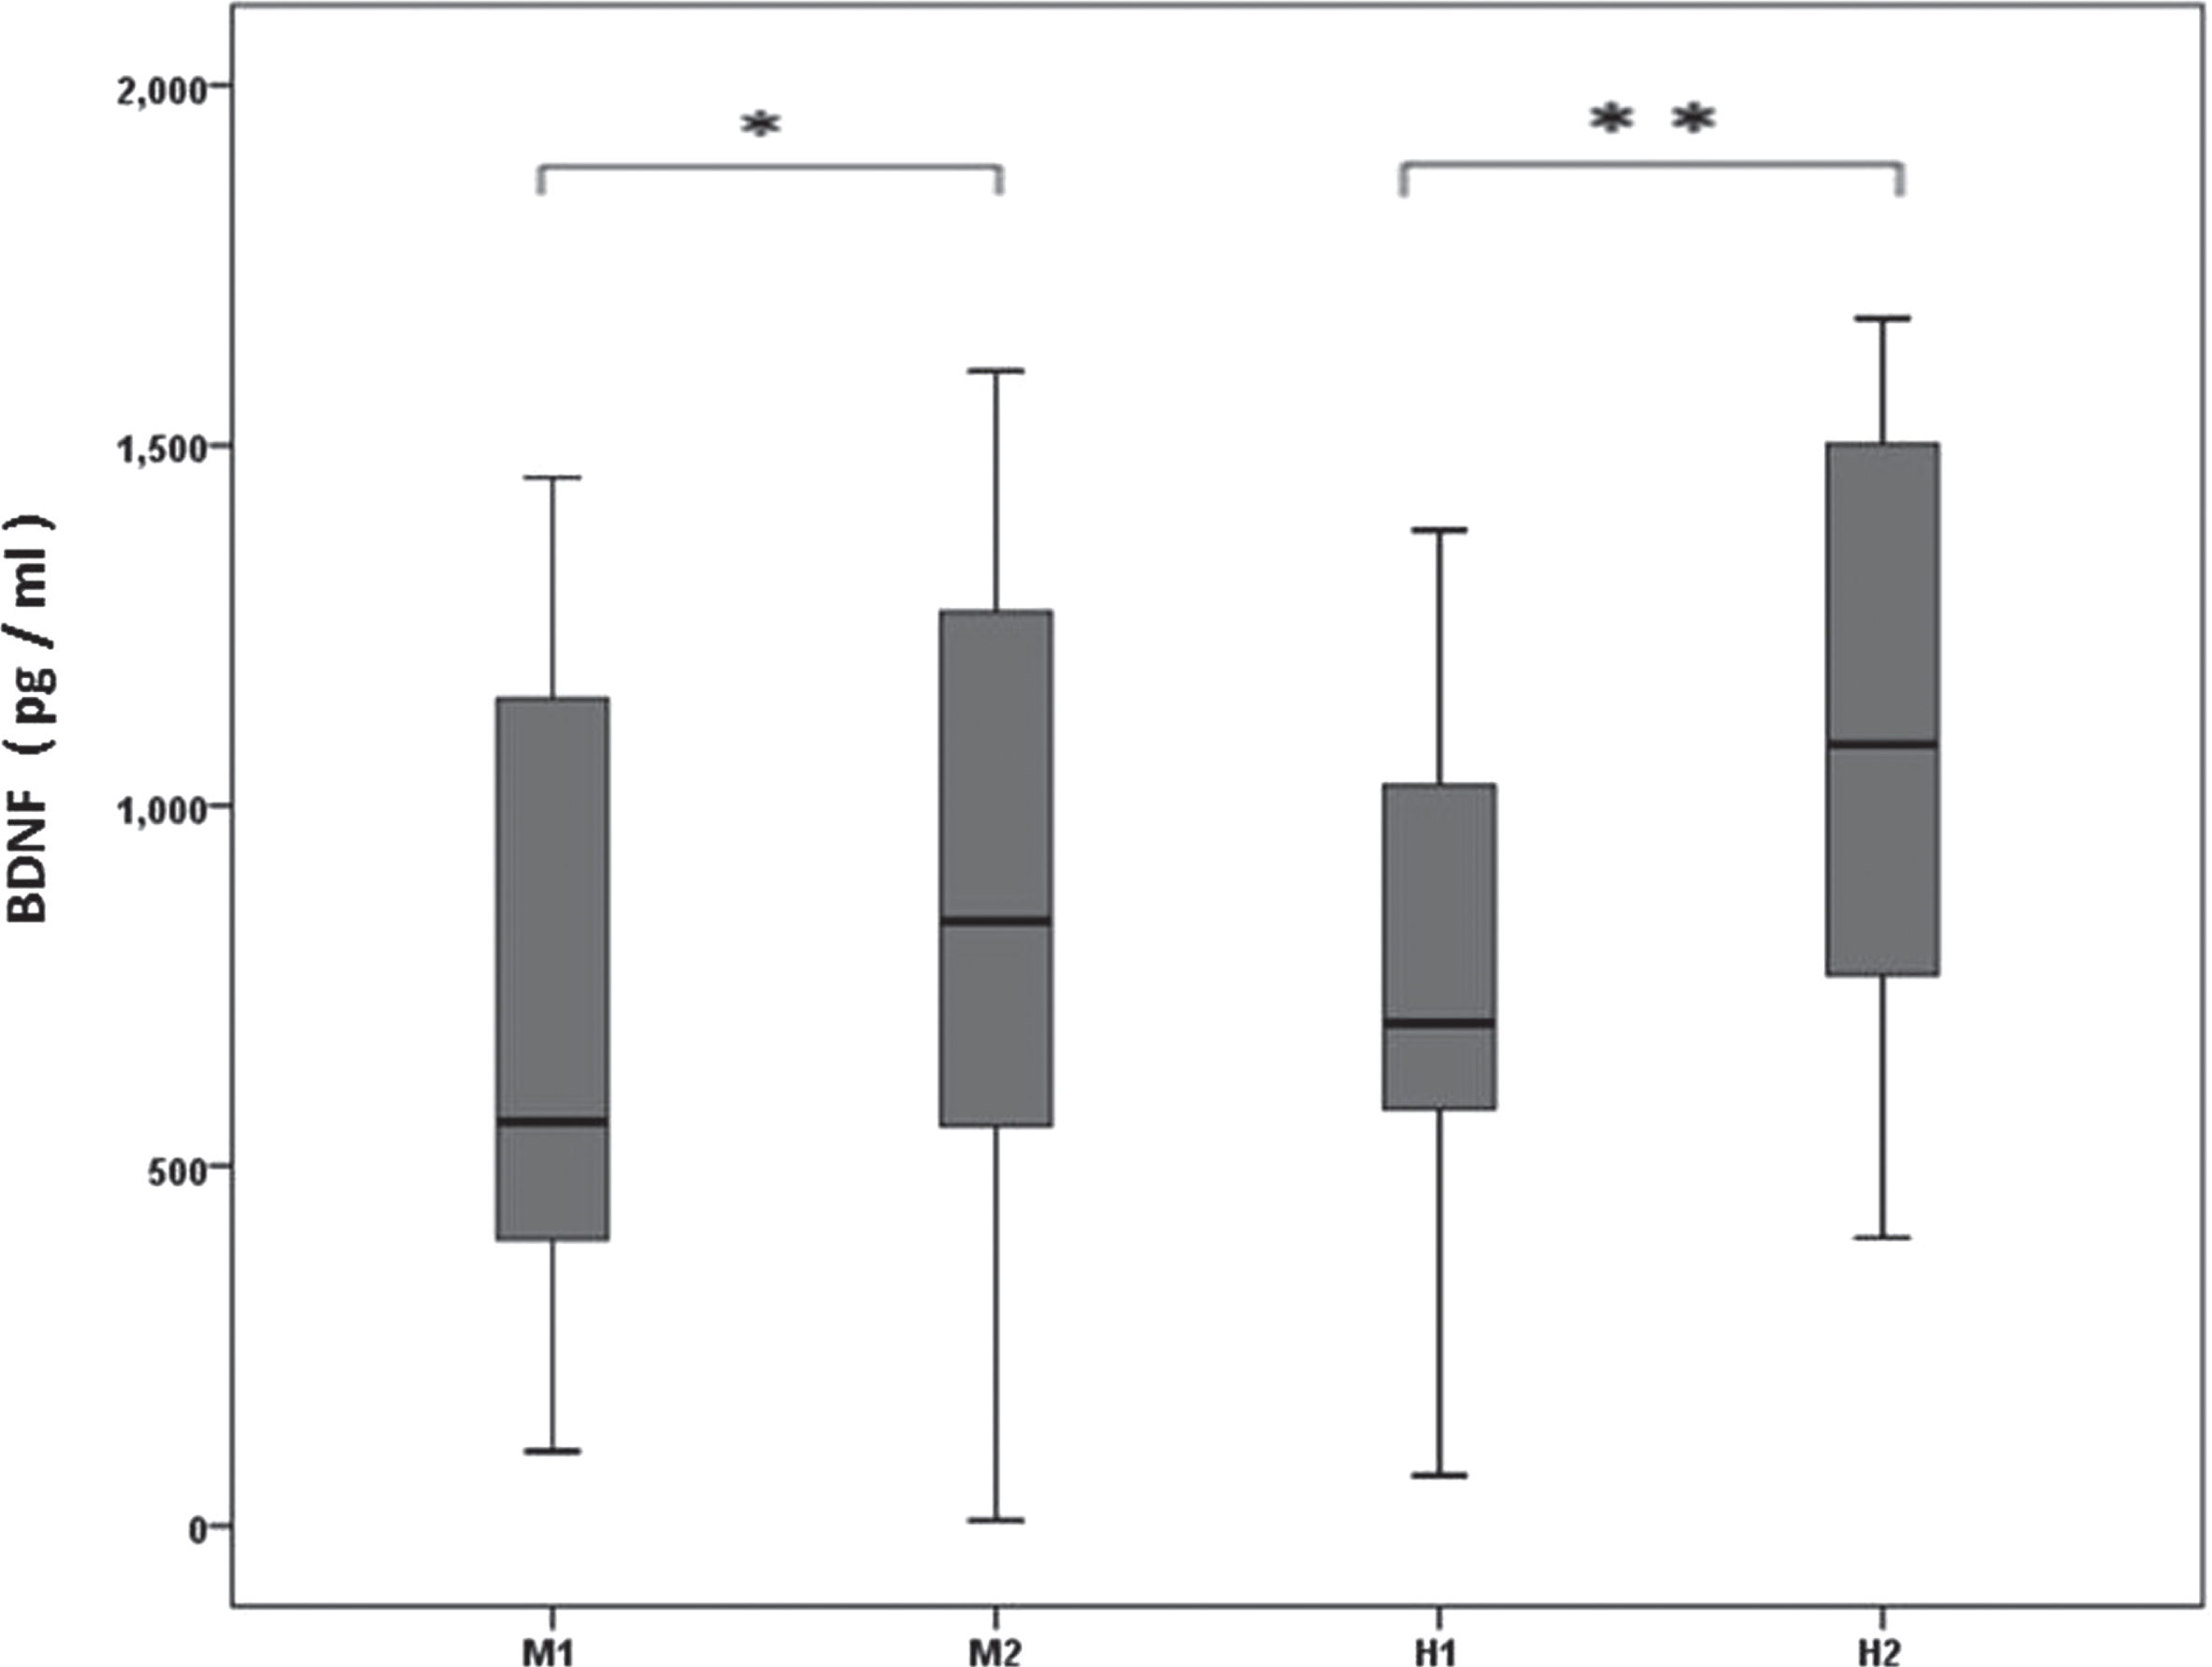 Box and Whisker plot of serum BDNF (pg/ml) levels before and after moderate and high intensity interval exercise. (M1 = before moderate exercise, M2 = after moderate exercise, H1 = before high intensity interval, H2 = after high intensity interval exercise).